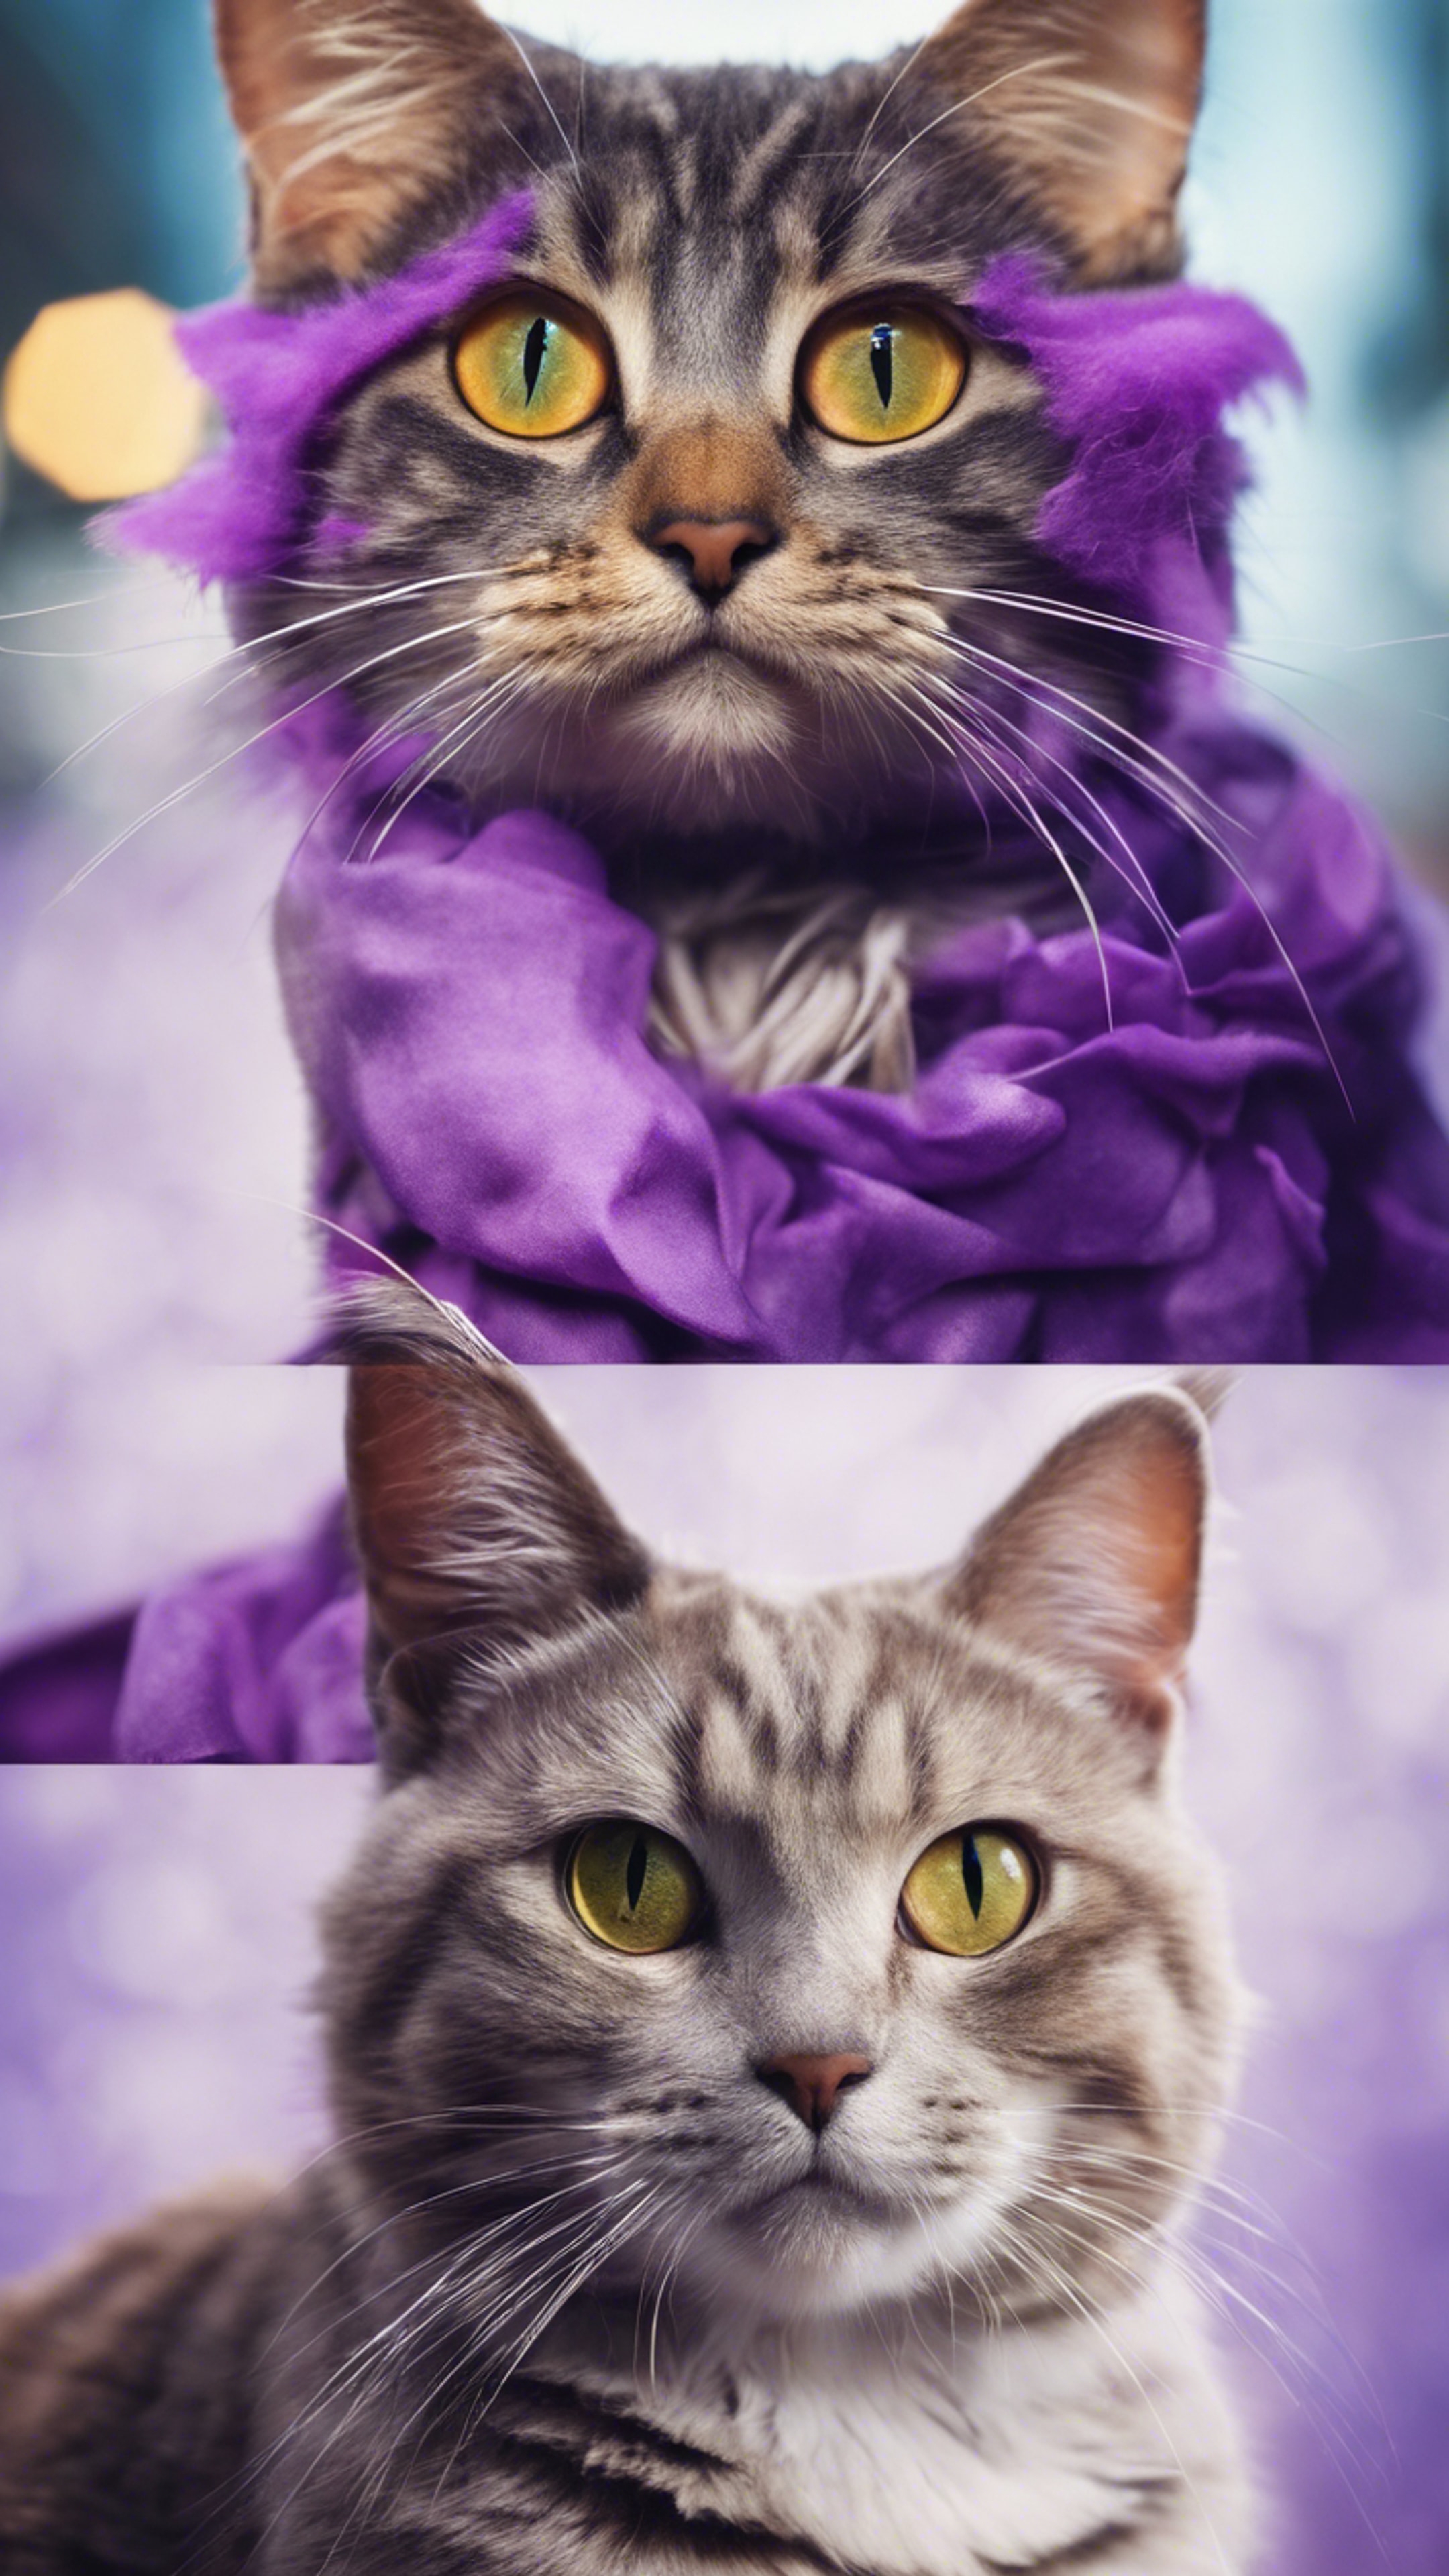 A playful collage showcasing various breeds of cats, all with unusual purple fur. Hintergrund[3a46628192d3463088be]